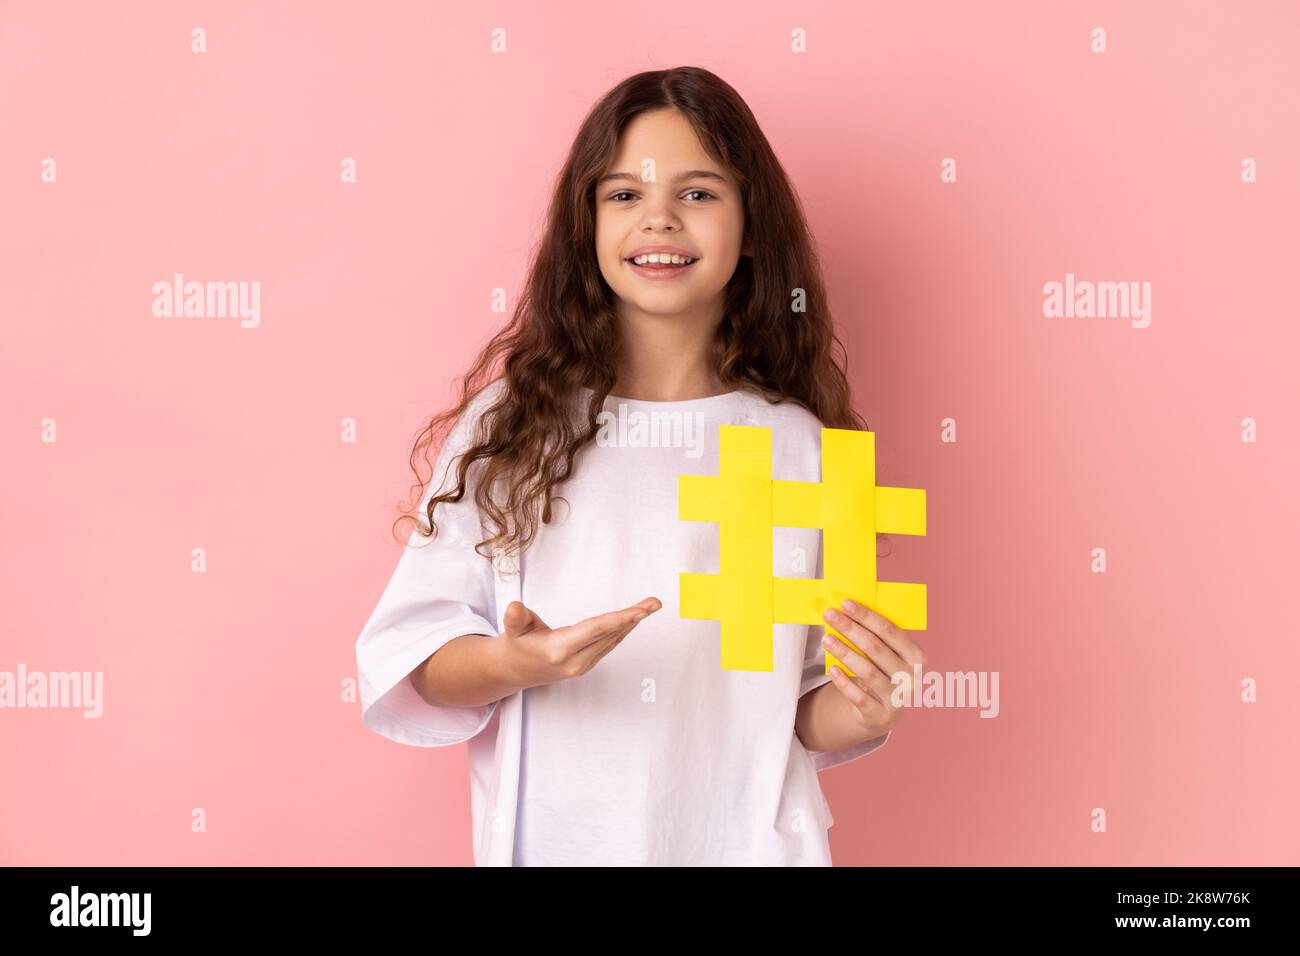 Portrait of little girl wearing white T-shirt presenting big yellow hashtag symbol and smiling at camera, blogging and child content. Indoor studio shot isolated on pink background. Stock Photo